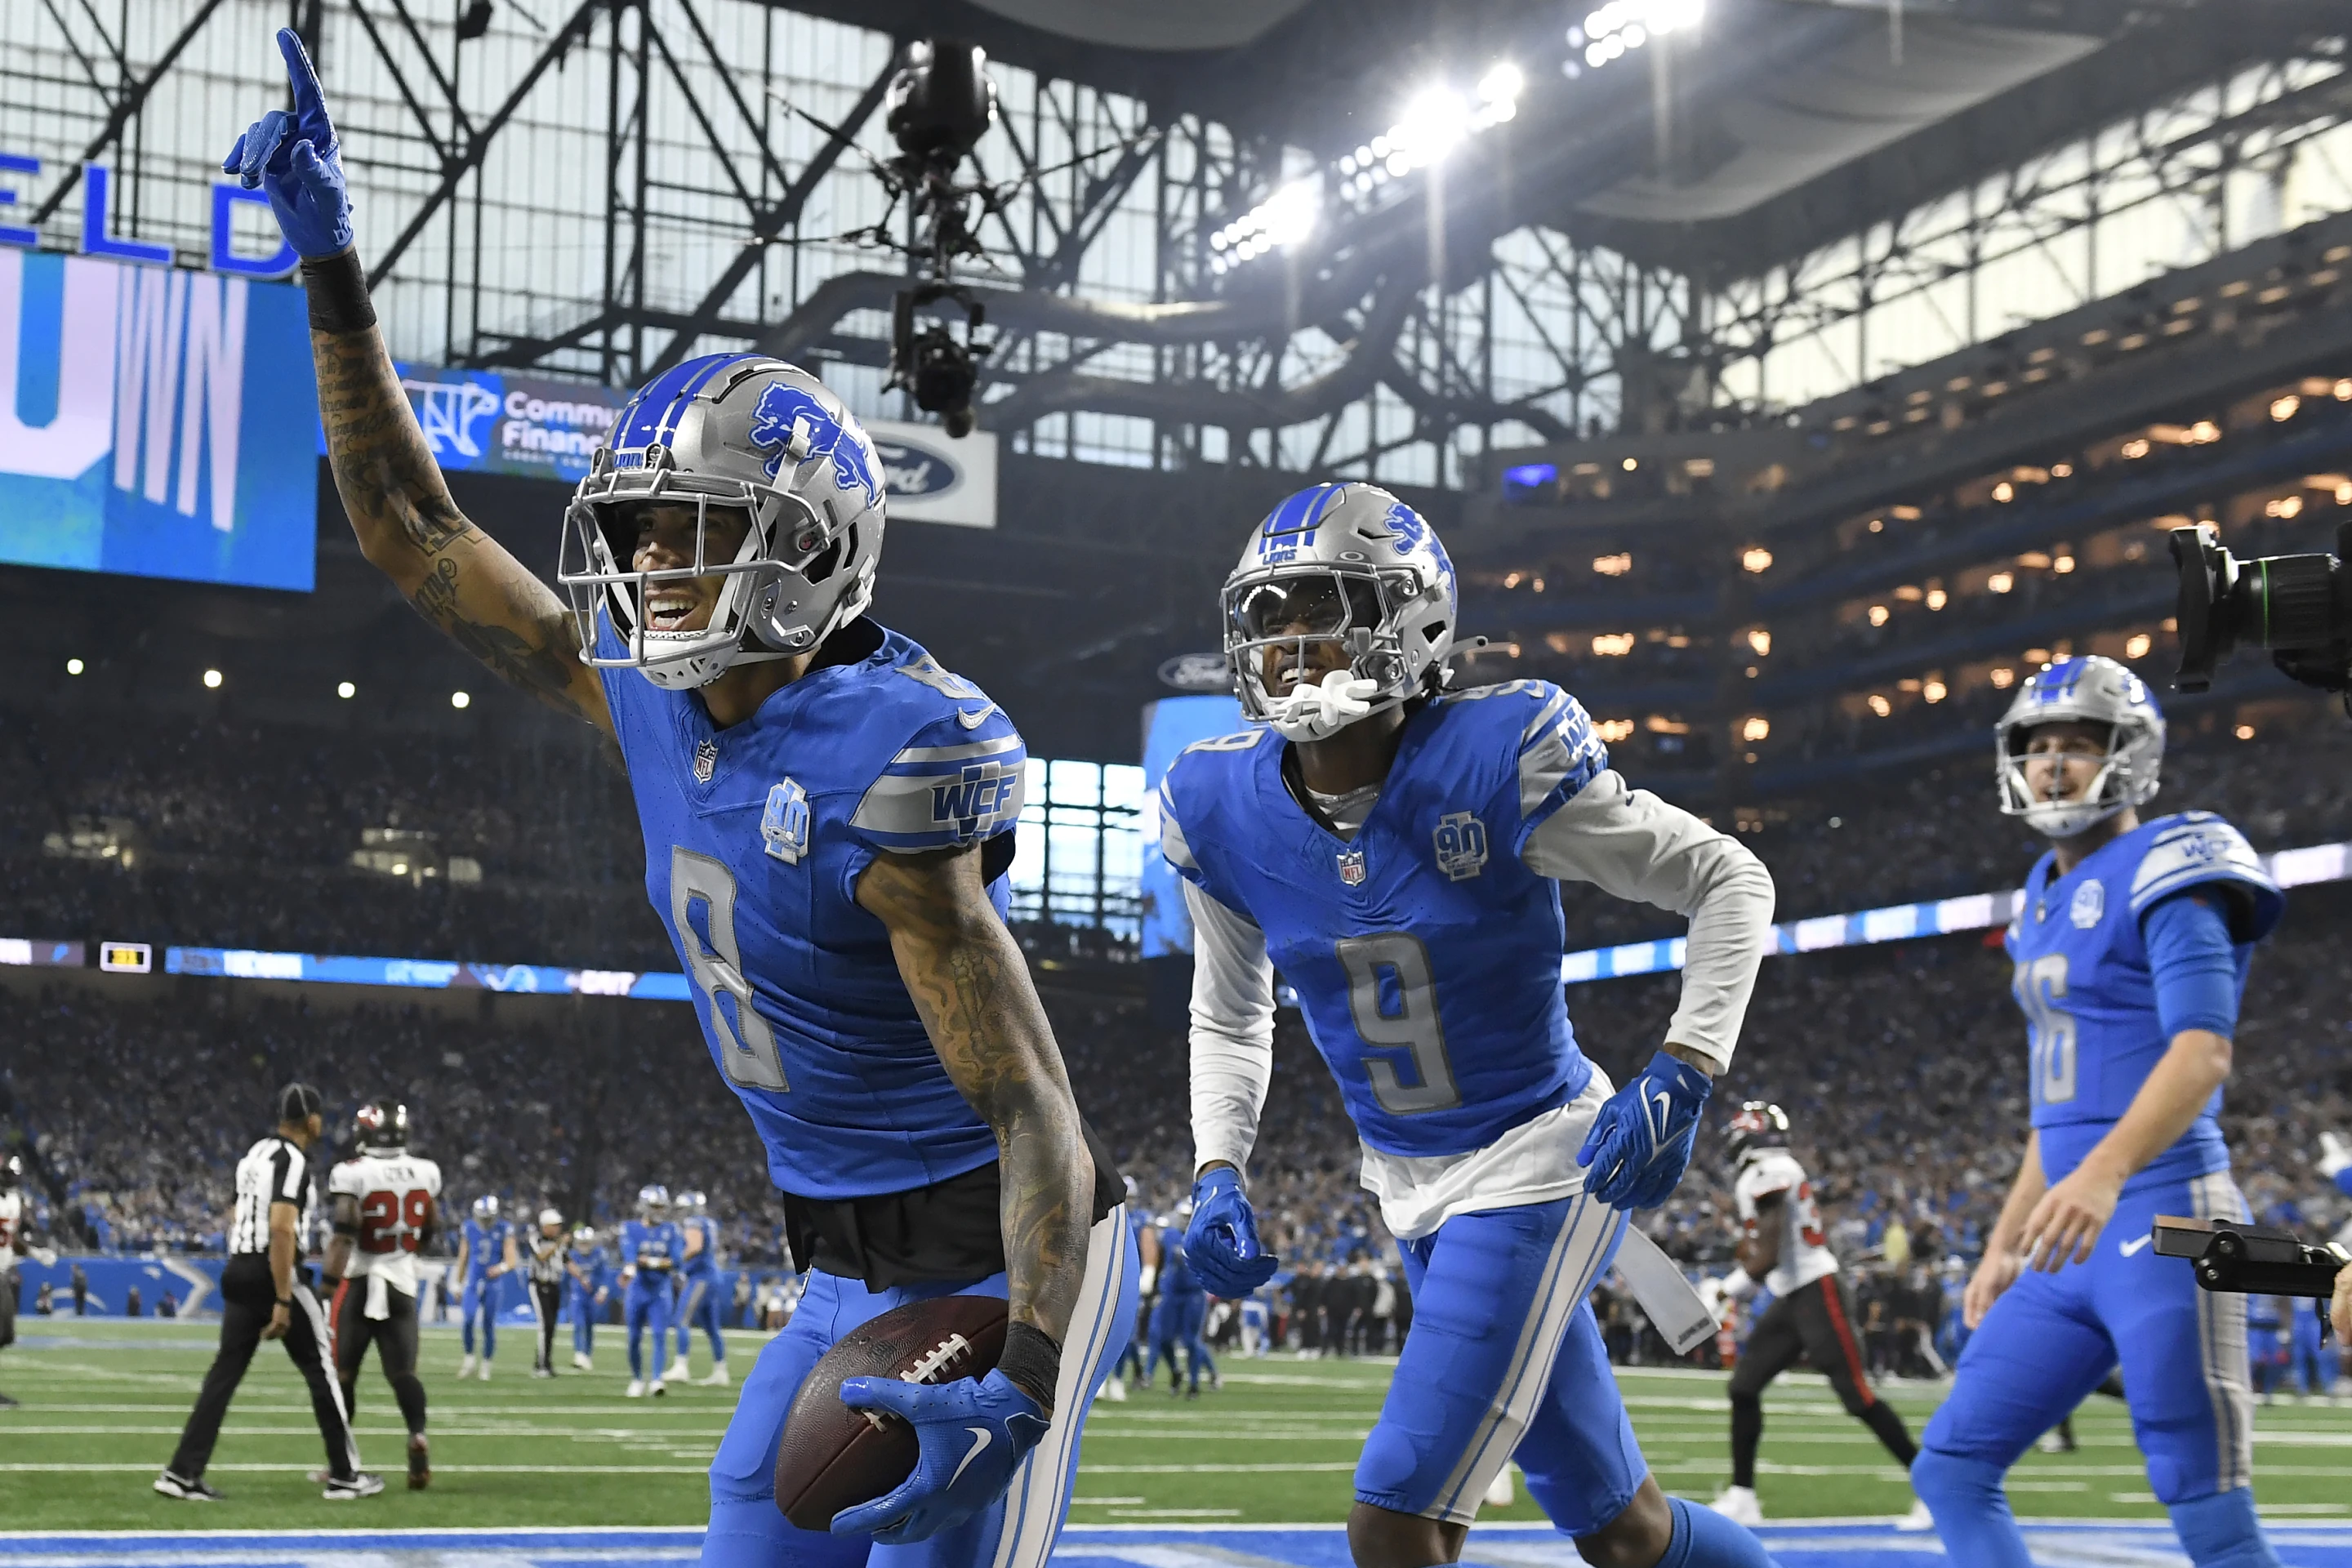 Players of the Detroit Lions celebrate after scoring a touchdown in the National Football League National Football Conference Divisional Game against the Tampa Bay Buccaneers at Ford Field in Detroit, Michigan, January 21, 2024. /AP